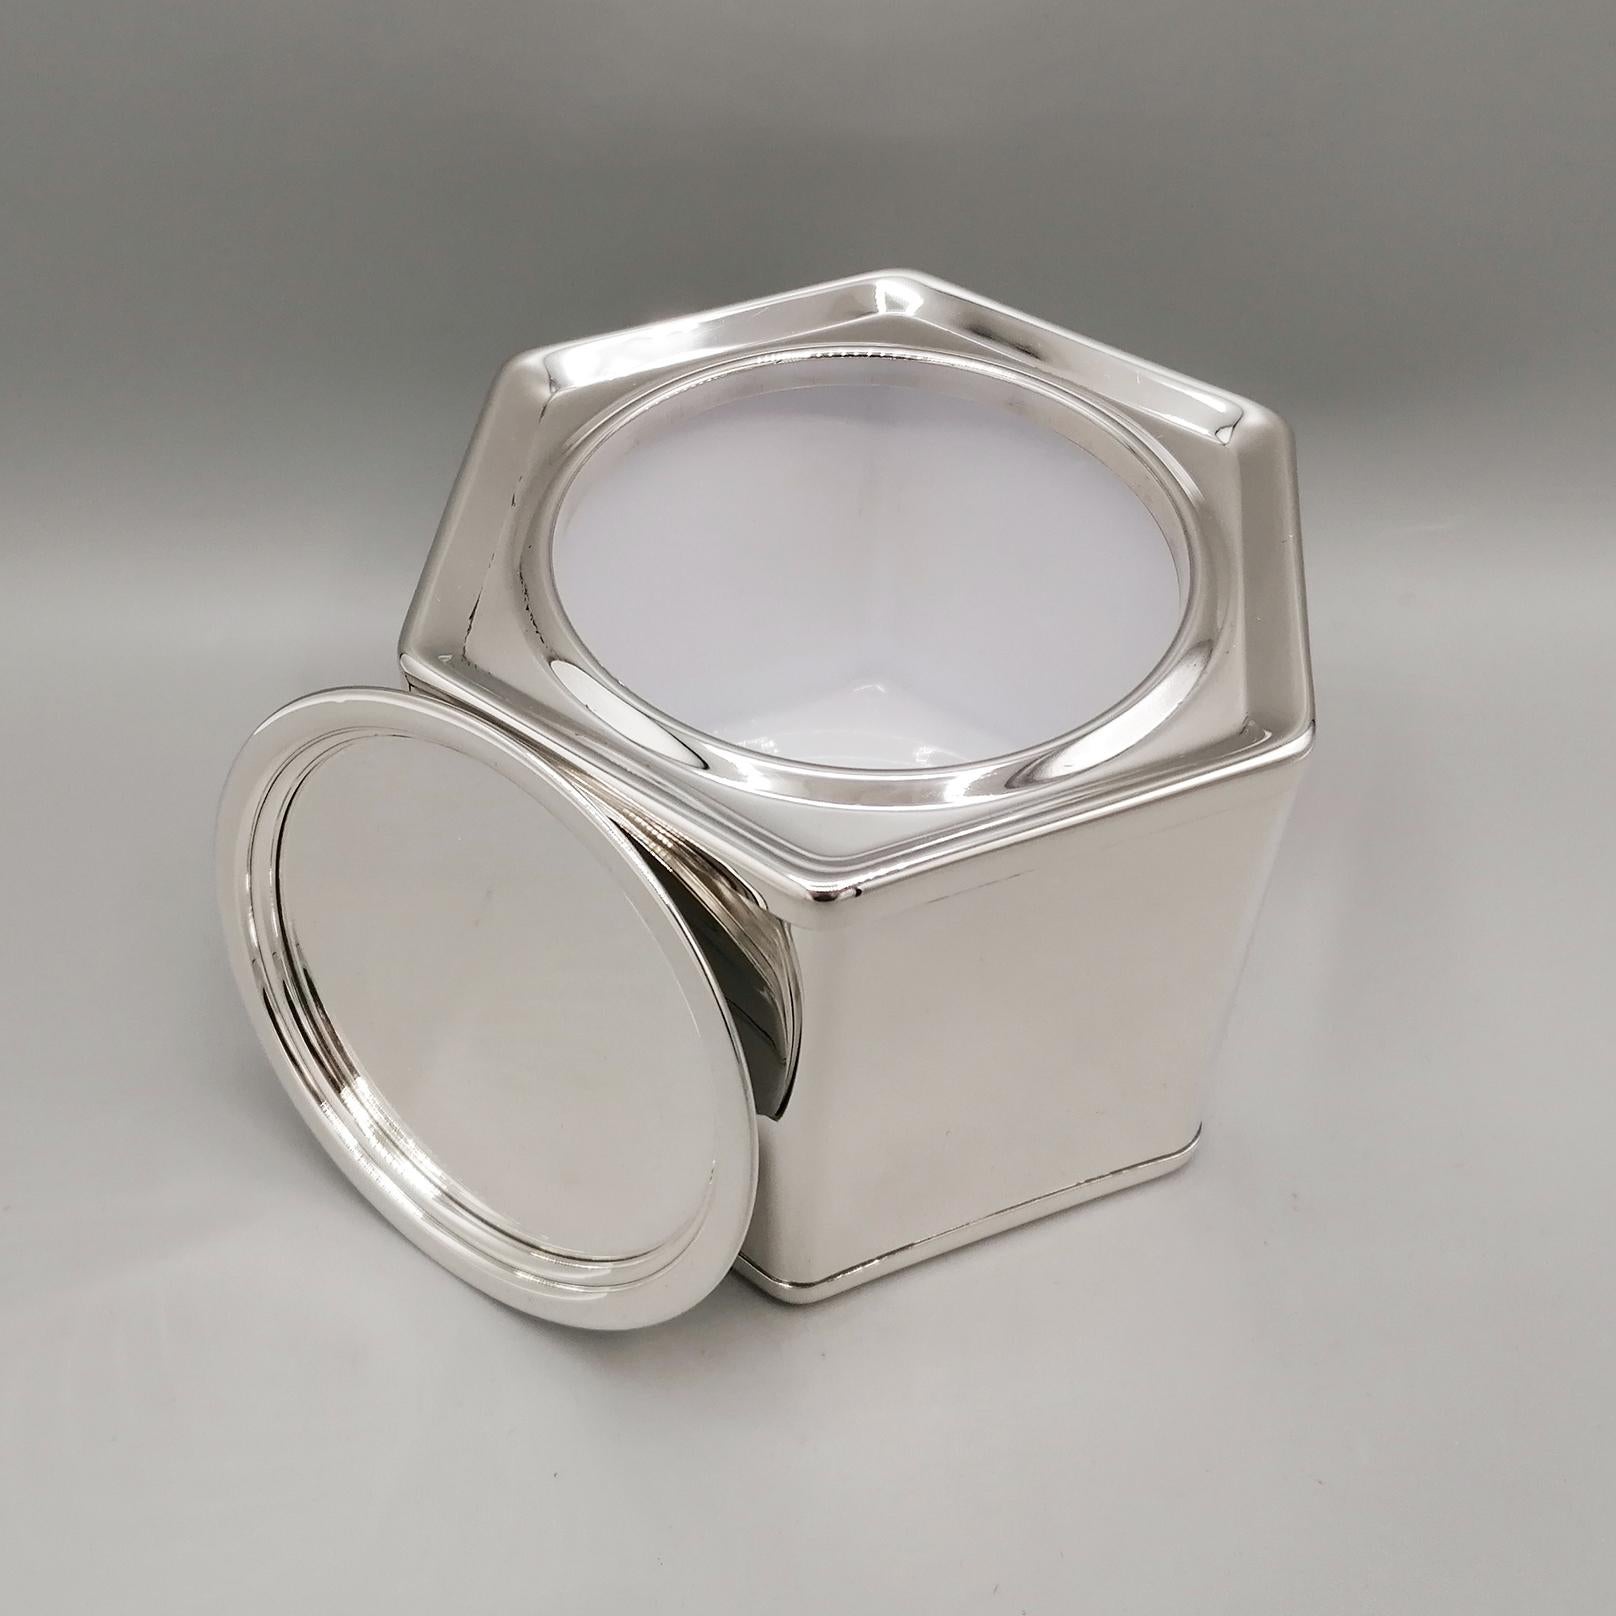 Contemporary 21st century Italian Sterling Silver hexagonal Tea/Candy Box For Sale